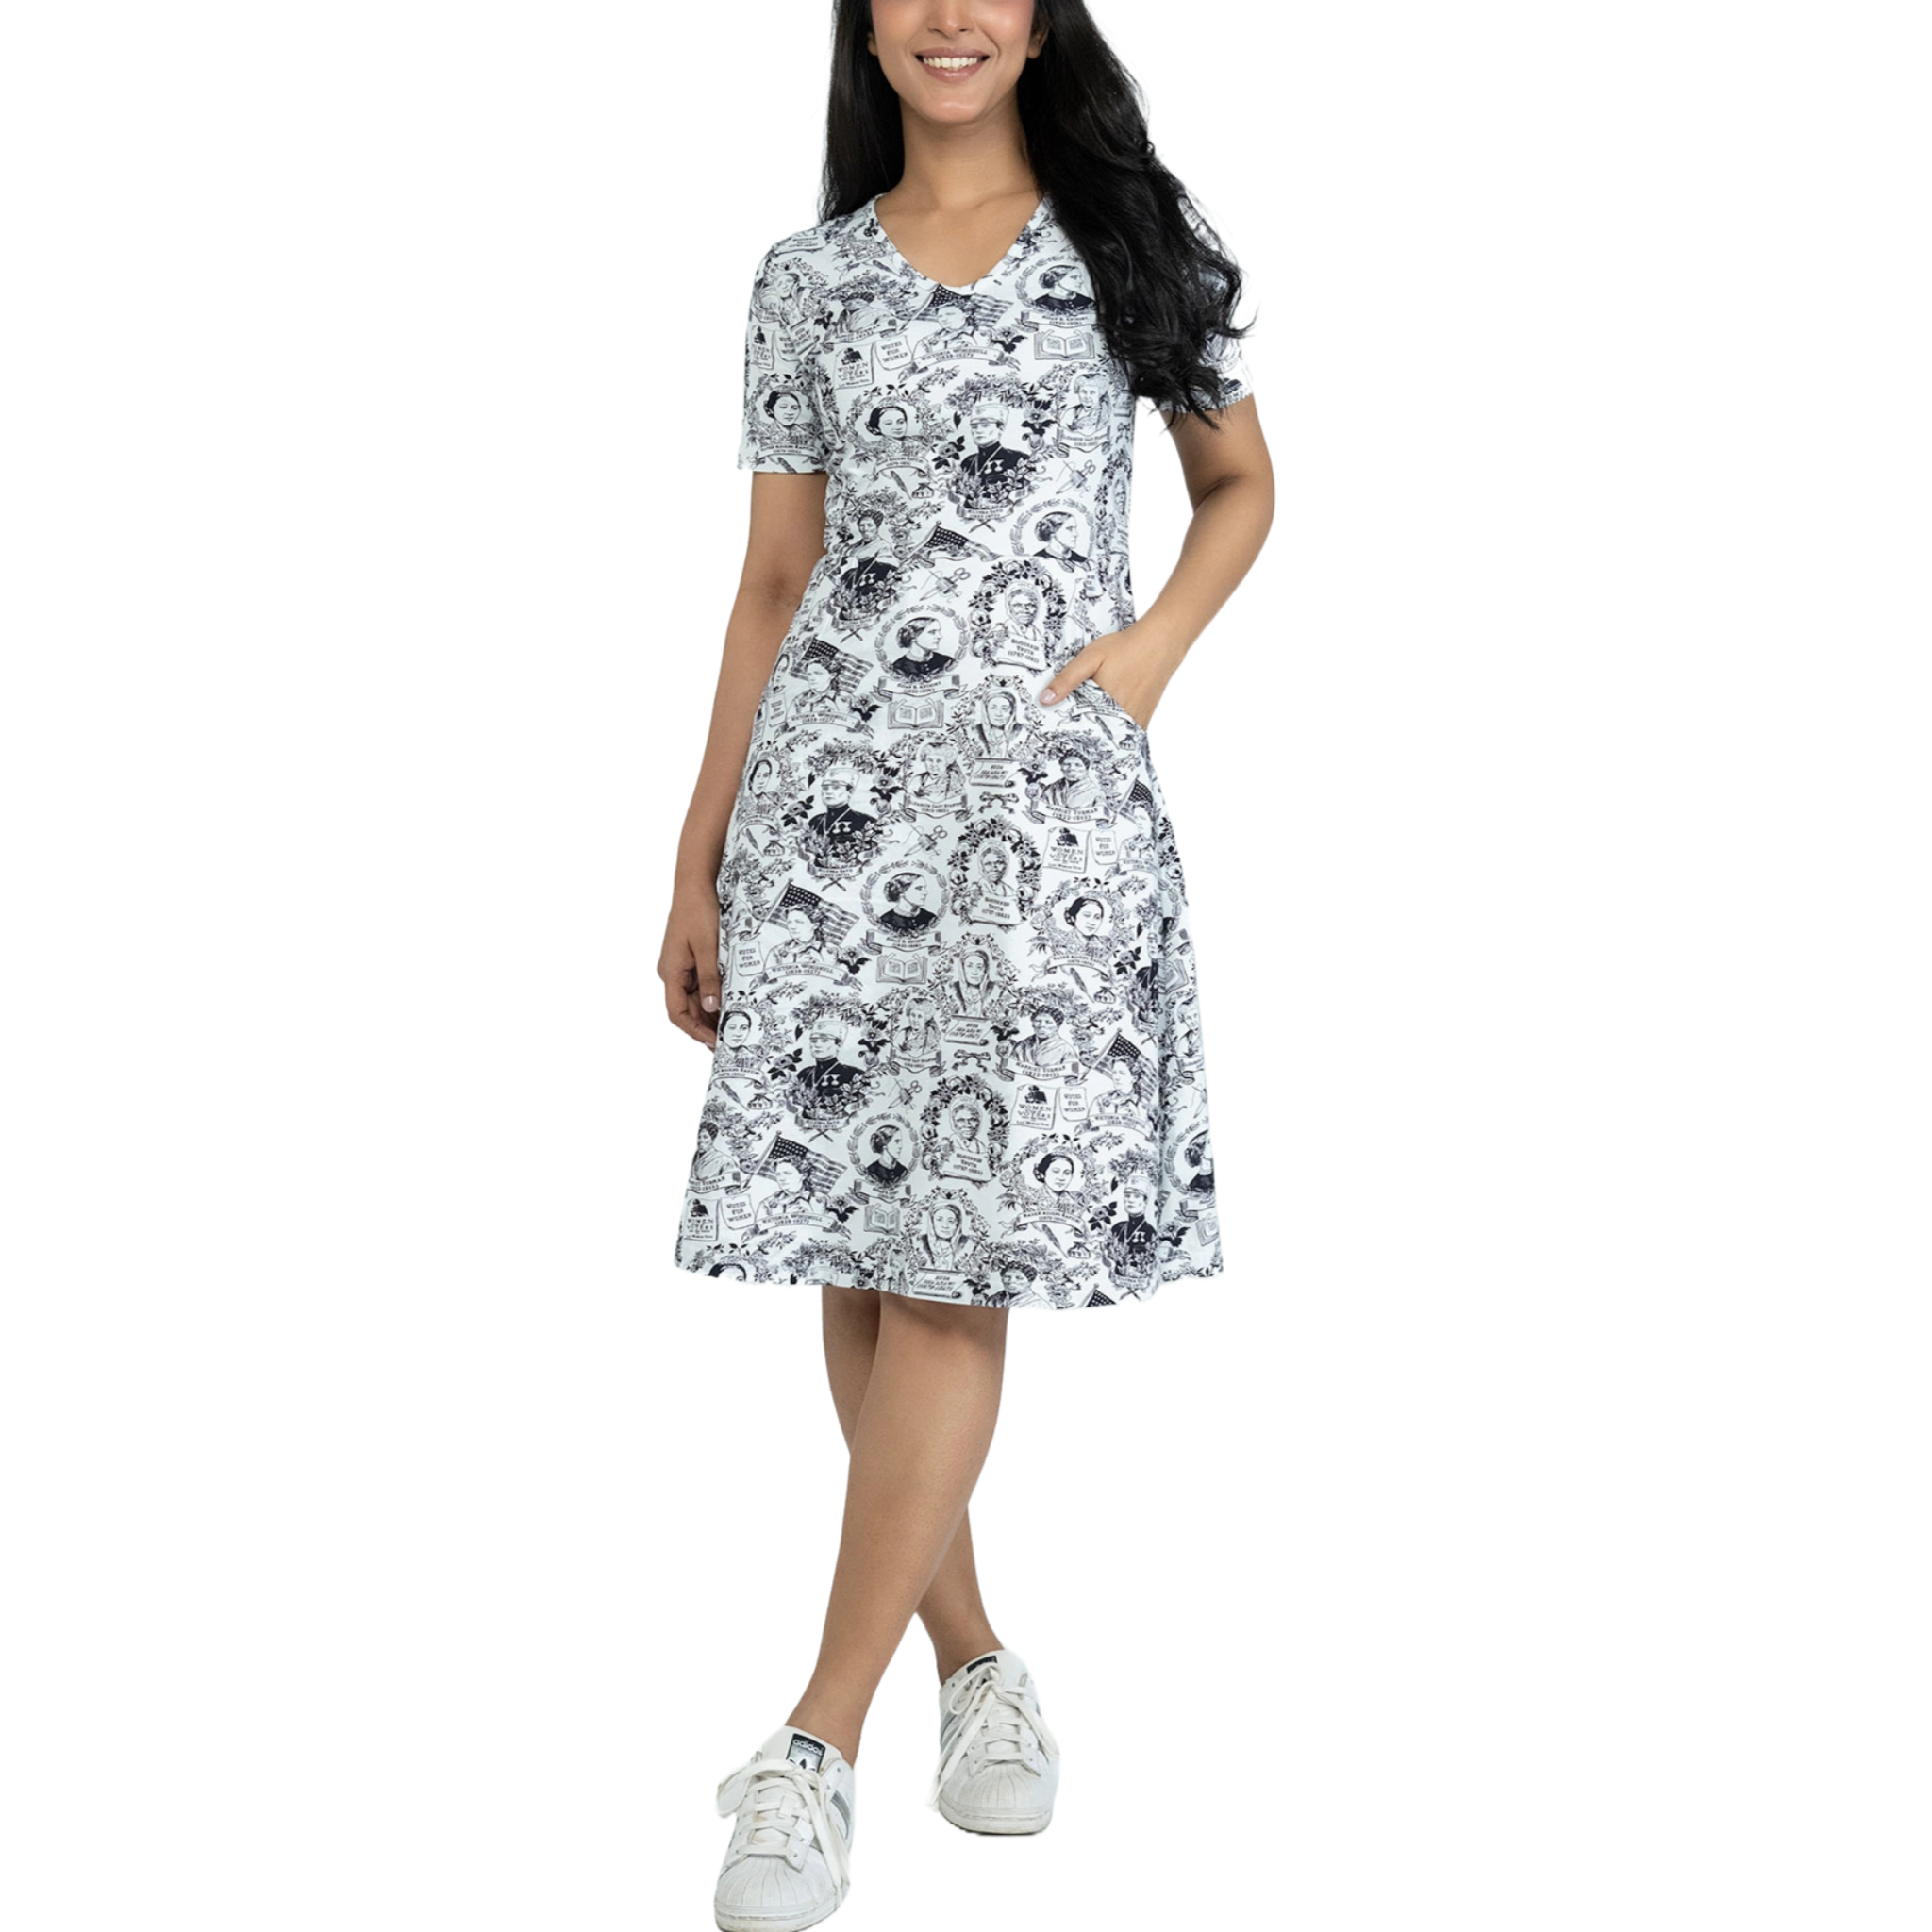 Women In History A-Line Dress (With Waist Seam)